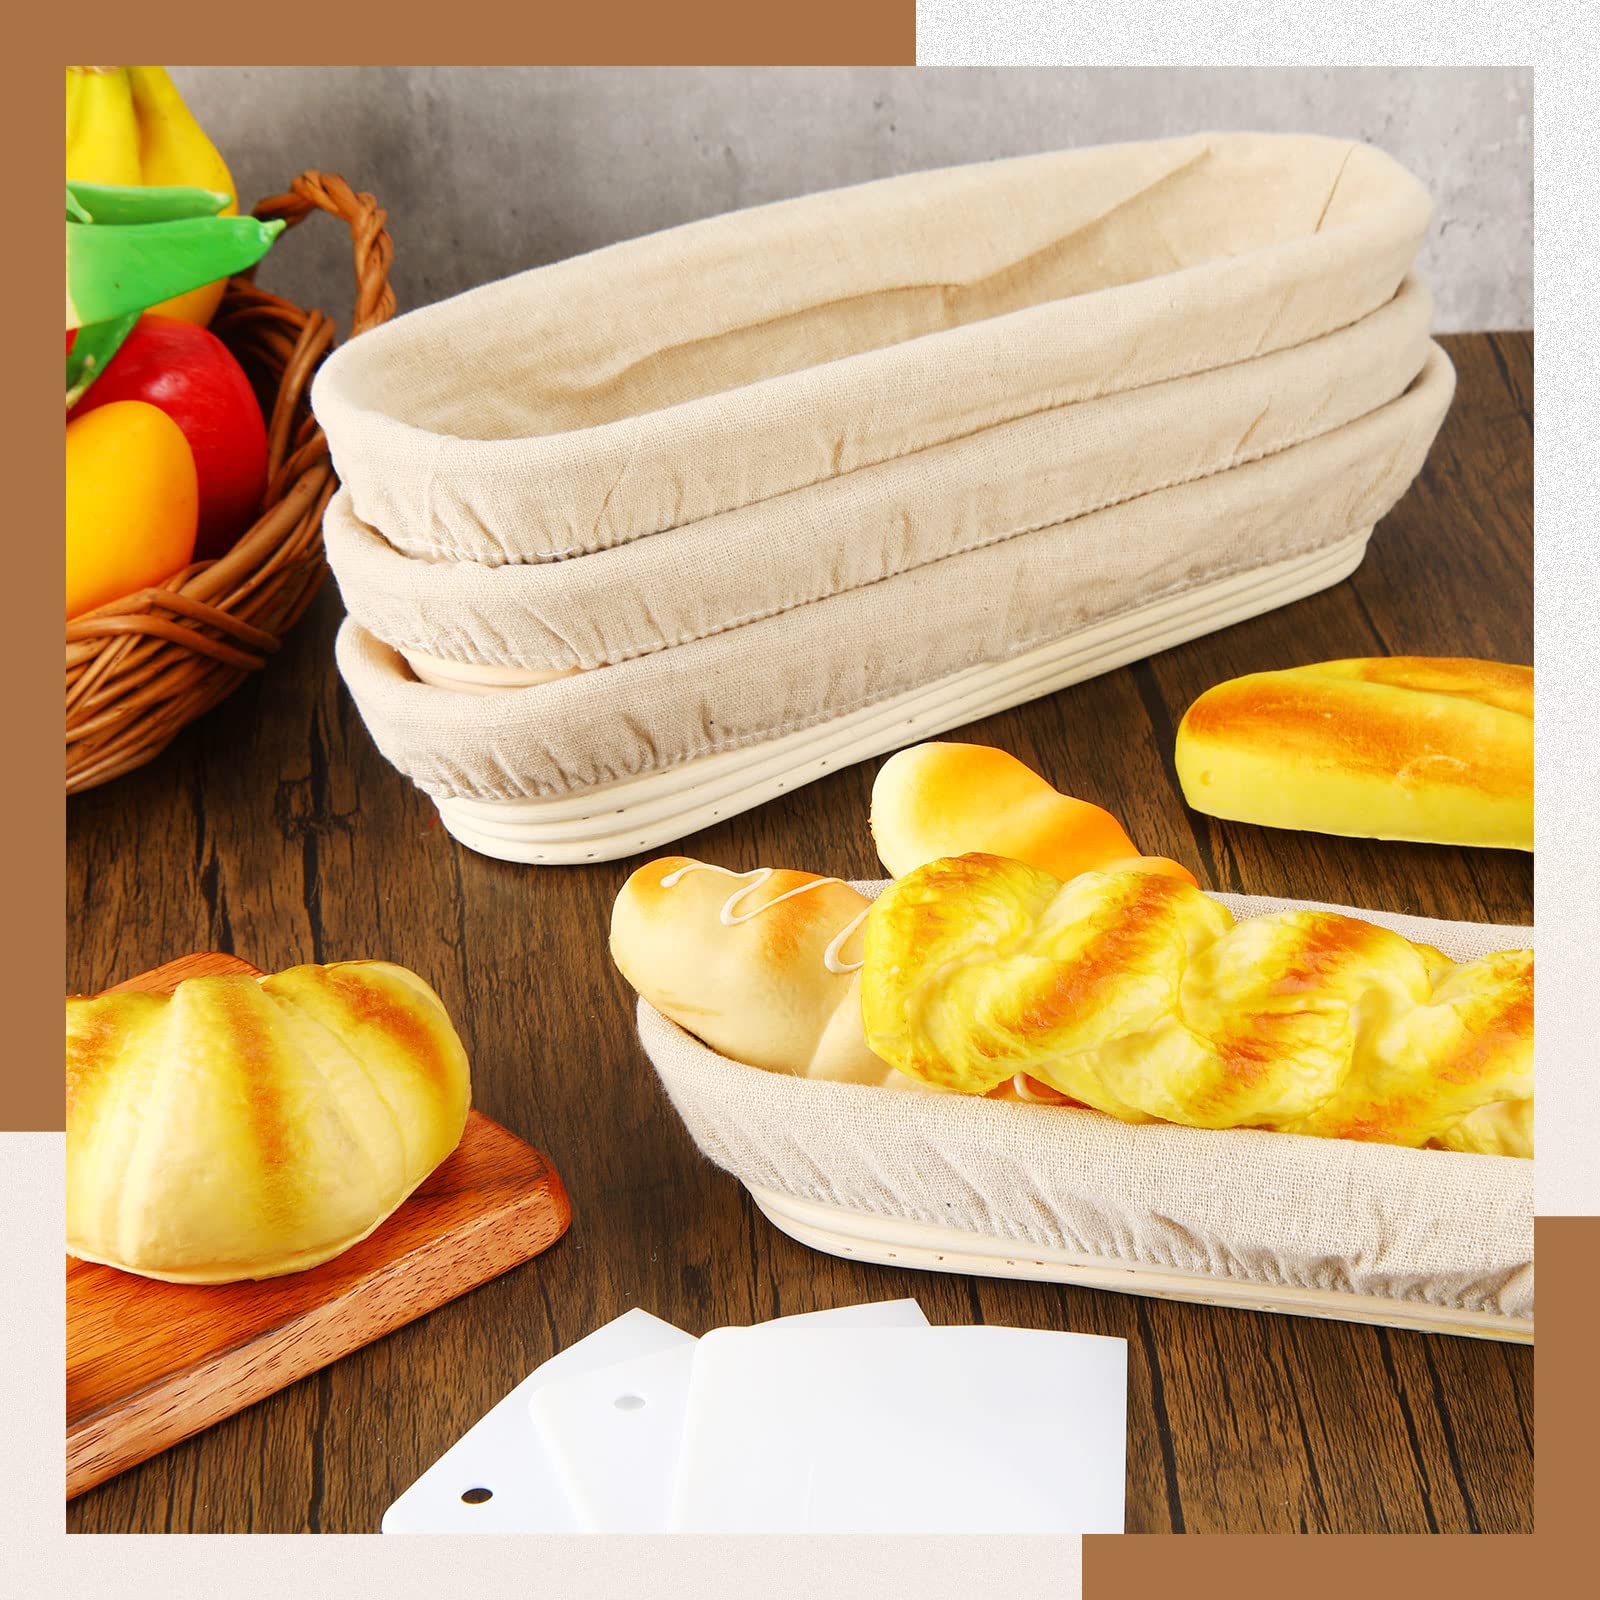 4 Pieces 13.8 Inch Banneton Bread Proofing Basket Oval Long Bread Proofing Basket Banneton Basket Dough Proofing Basket with Liners and Scatters for Home Sourdough Bread Baking